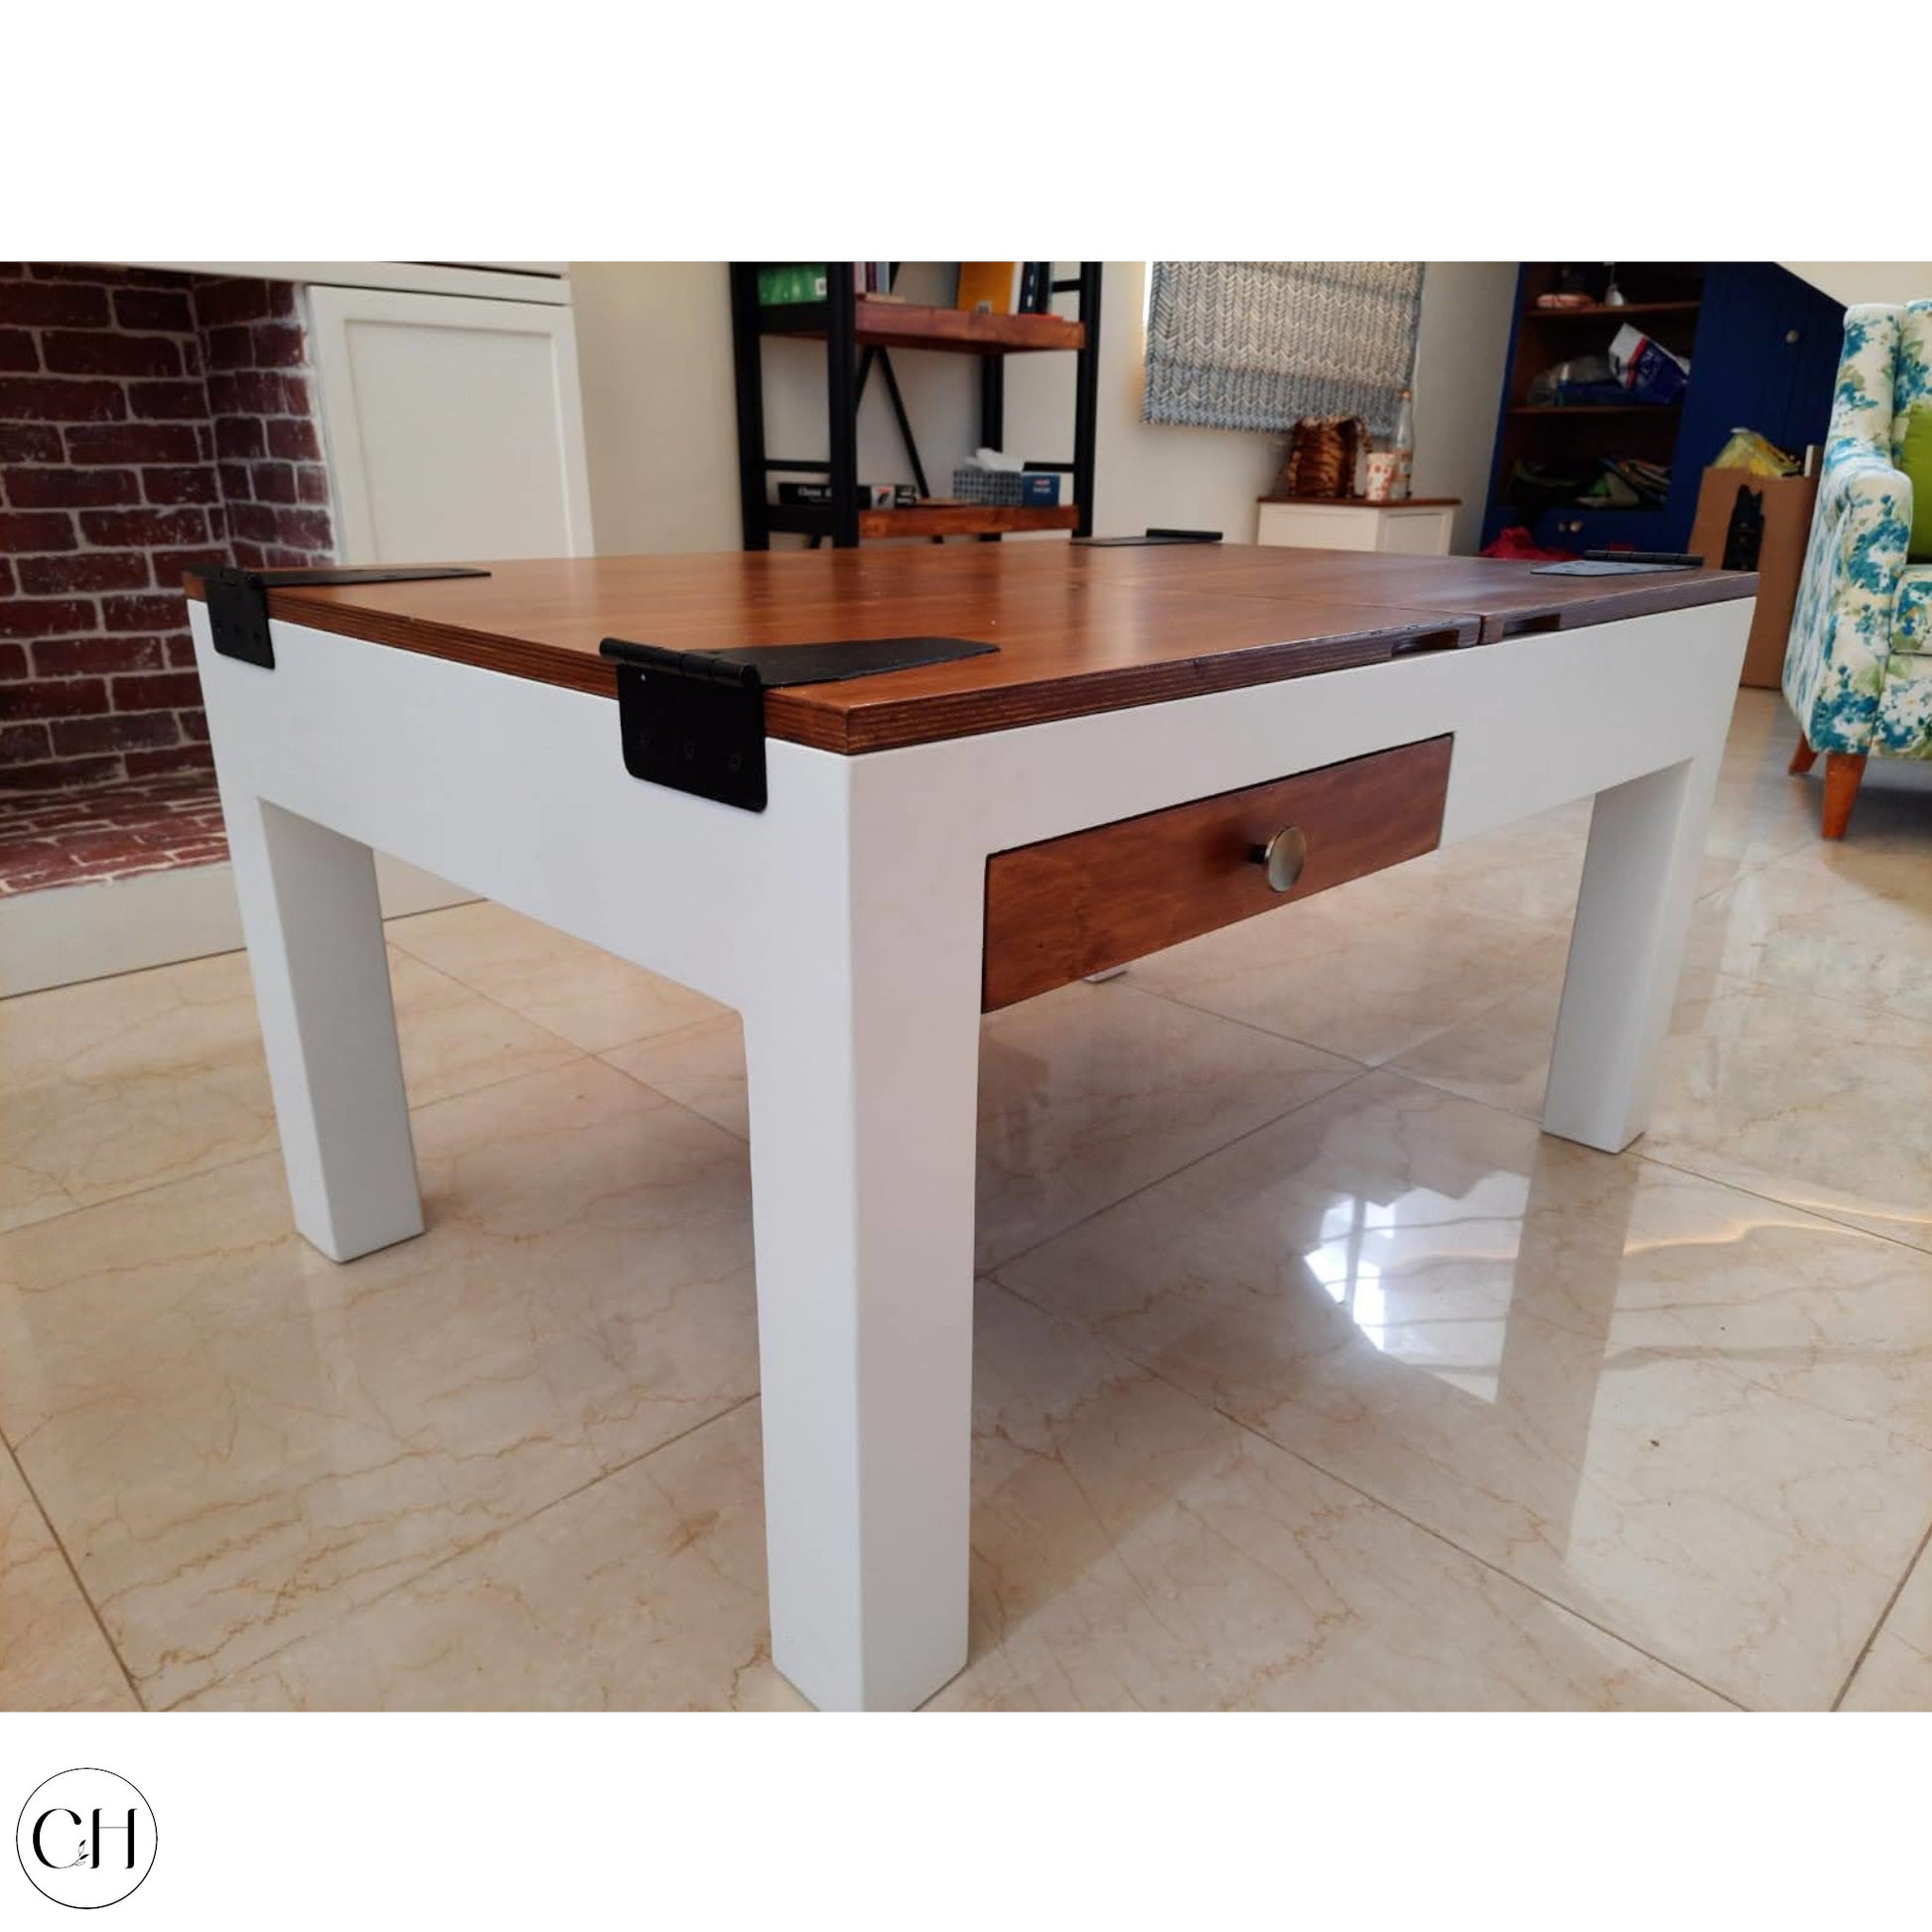 CustHum-Spilsbury-coffee table with folding top to store jigsaw puzzle, small drawer (ISO, closed)